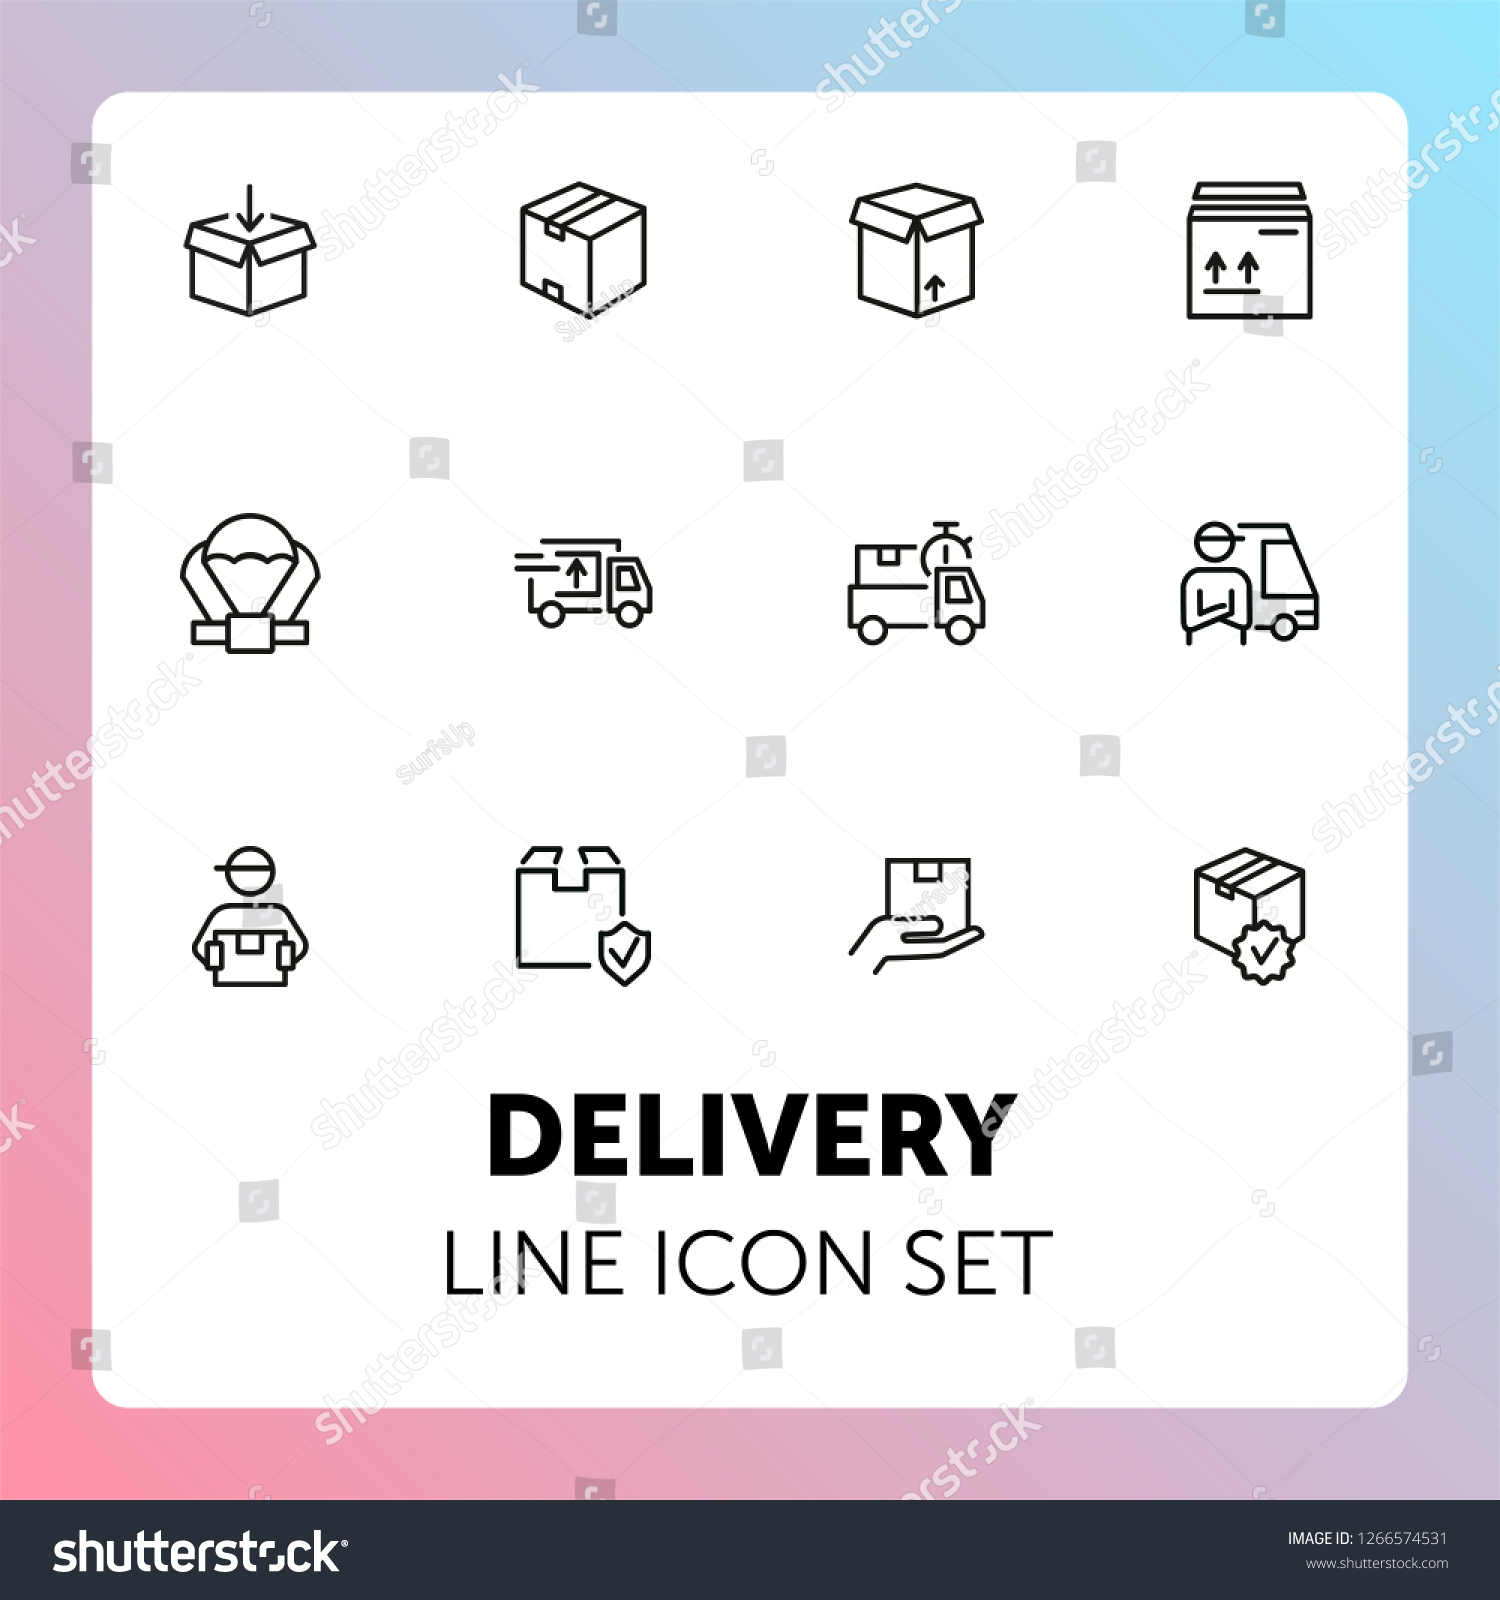 Delivery line icon set. Cargo, box, truck, courier. Delivery service concept. Can be used for topics like shipment, logistics, transportation #1266574531